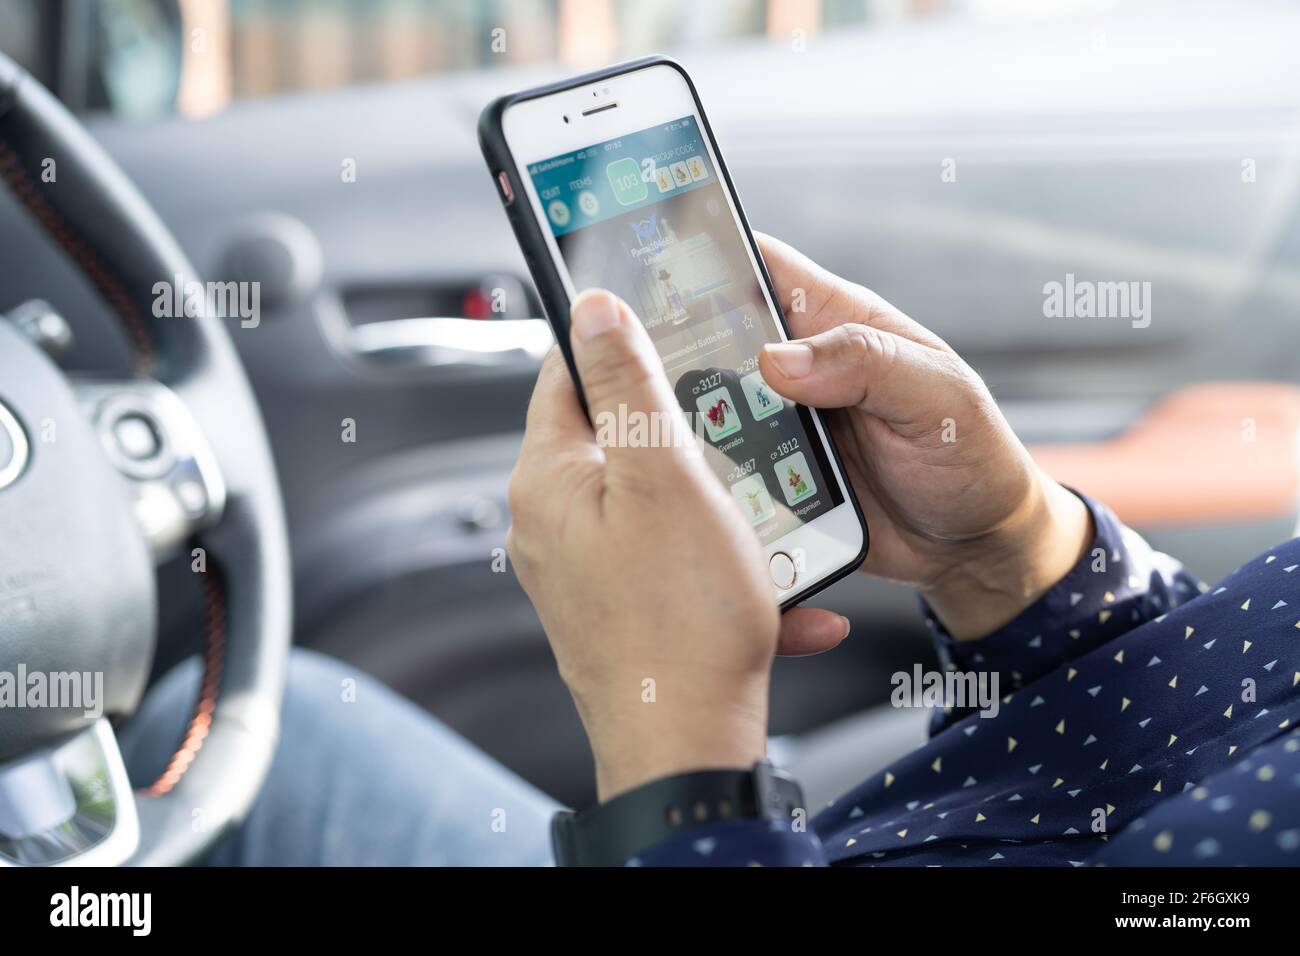 Bangkok, Thailand, July 1, 2020 Holding iPhone in toyota sienta car to communication with family and friends. Stock Photo